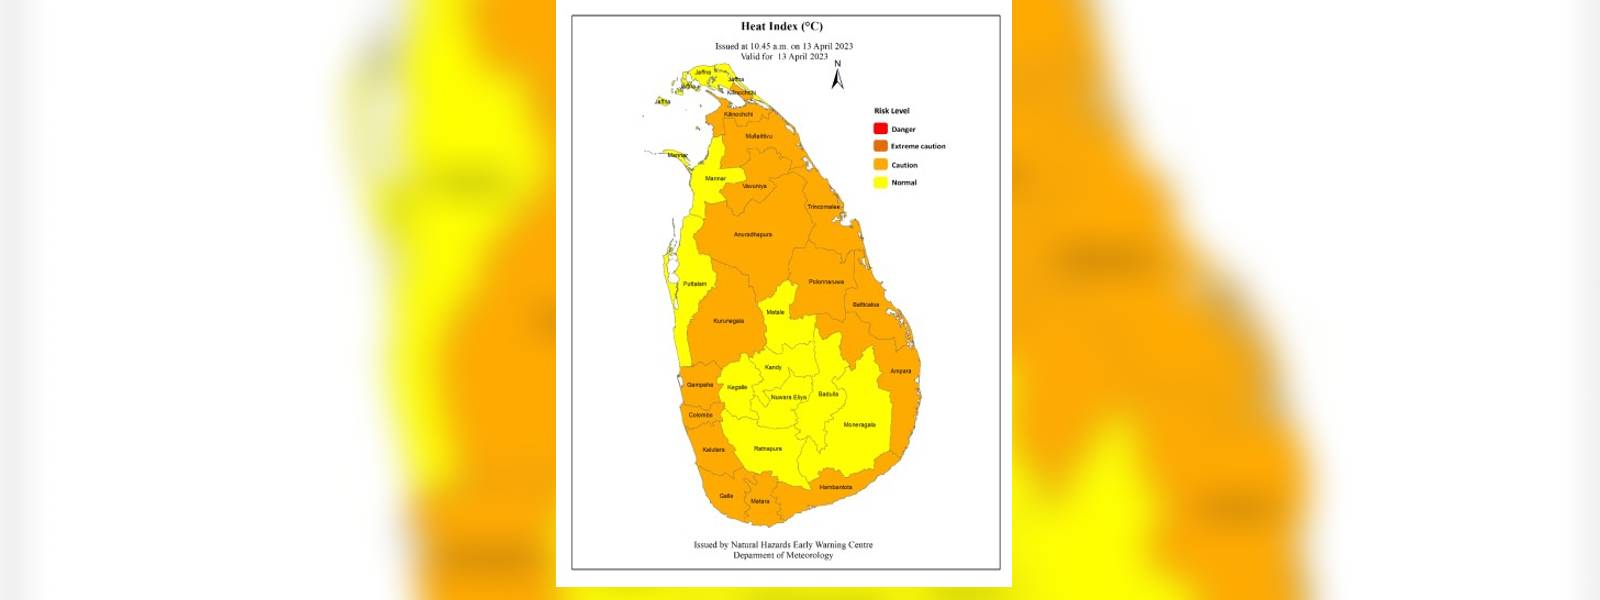 Sri Lanka Met Department issues heat warning for Thursday and Friday